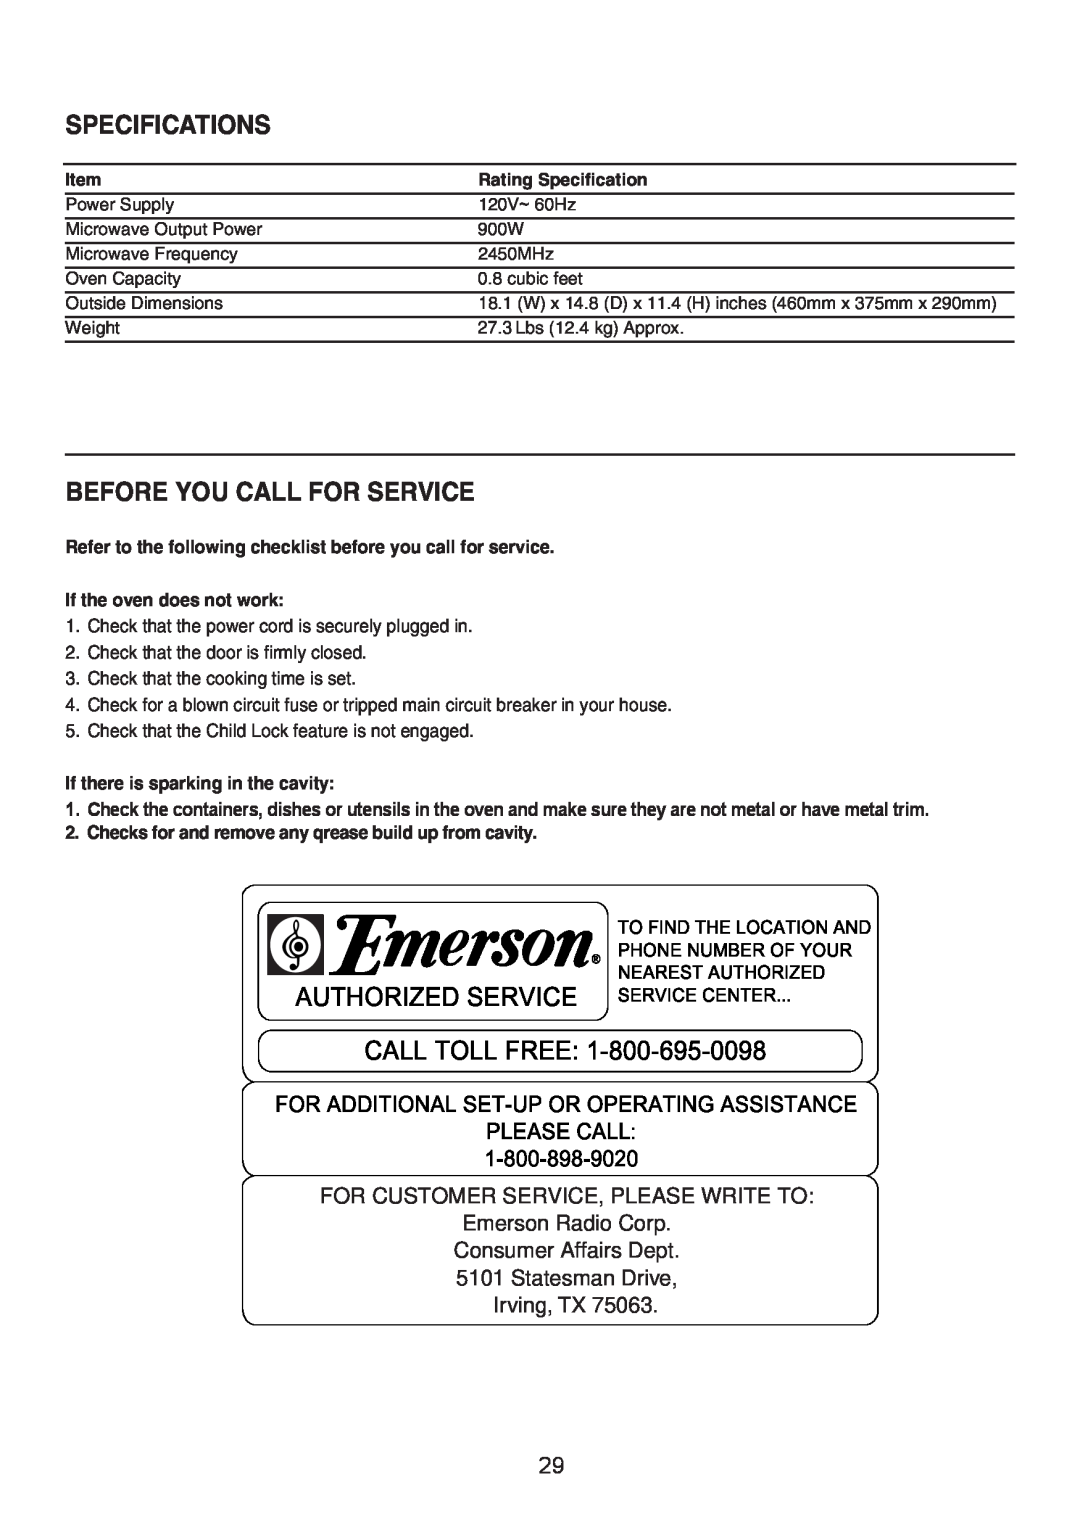 Emerson MW8889SB Specifications, Before You Call For Service, FOR CUSTOMER SERVICE, PLEASE WRITE TO Emerson Radio Corp 